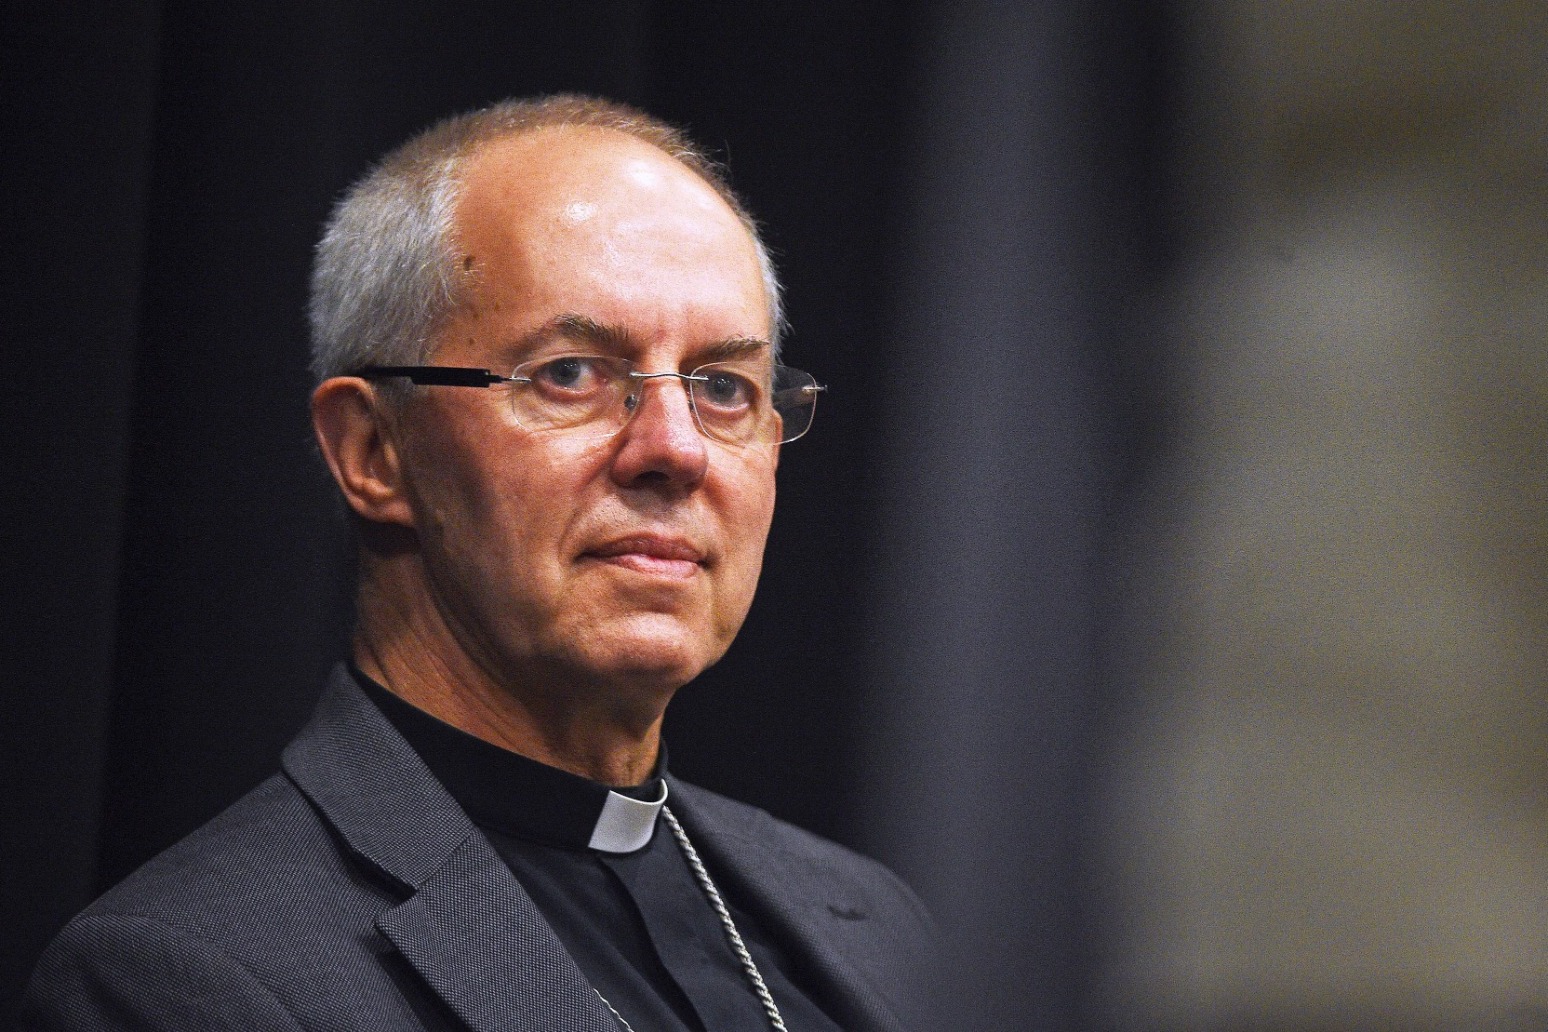 DIRECTION UK IS HEADED \'NOT WHAT WE WANT\', SAYS ARCHBISHOP 